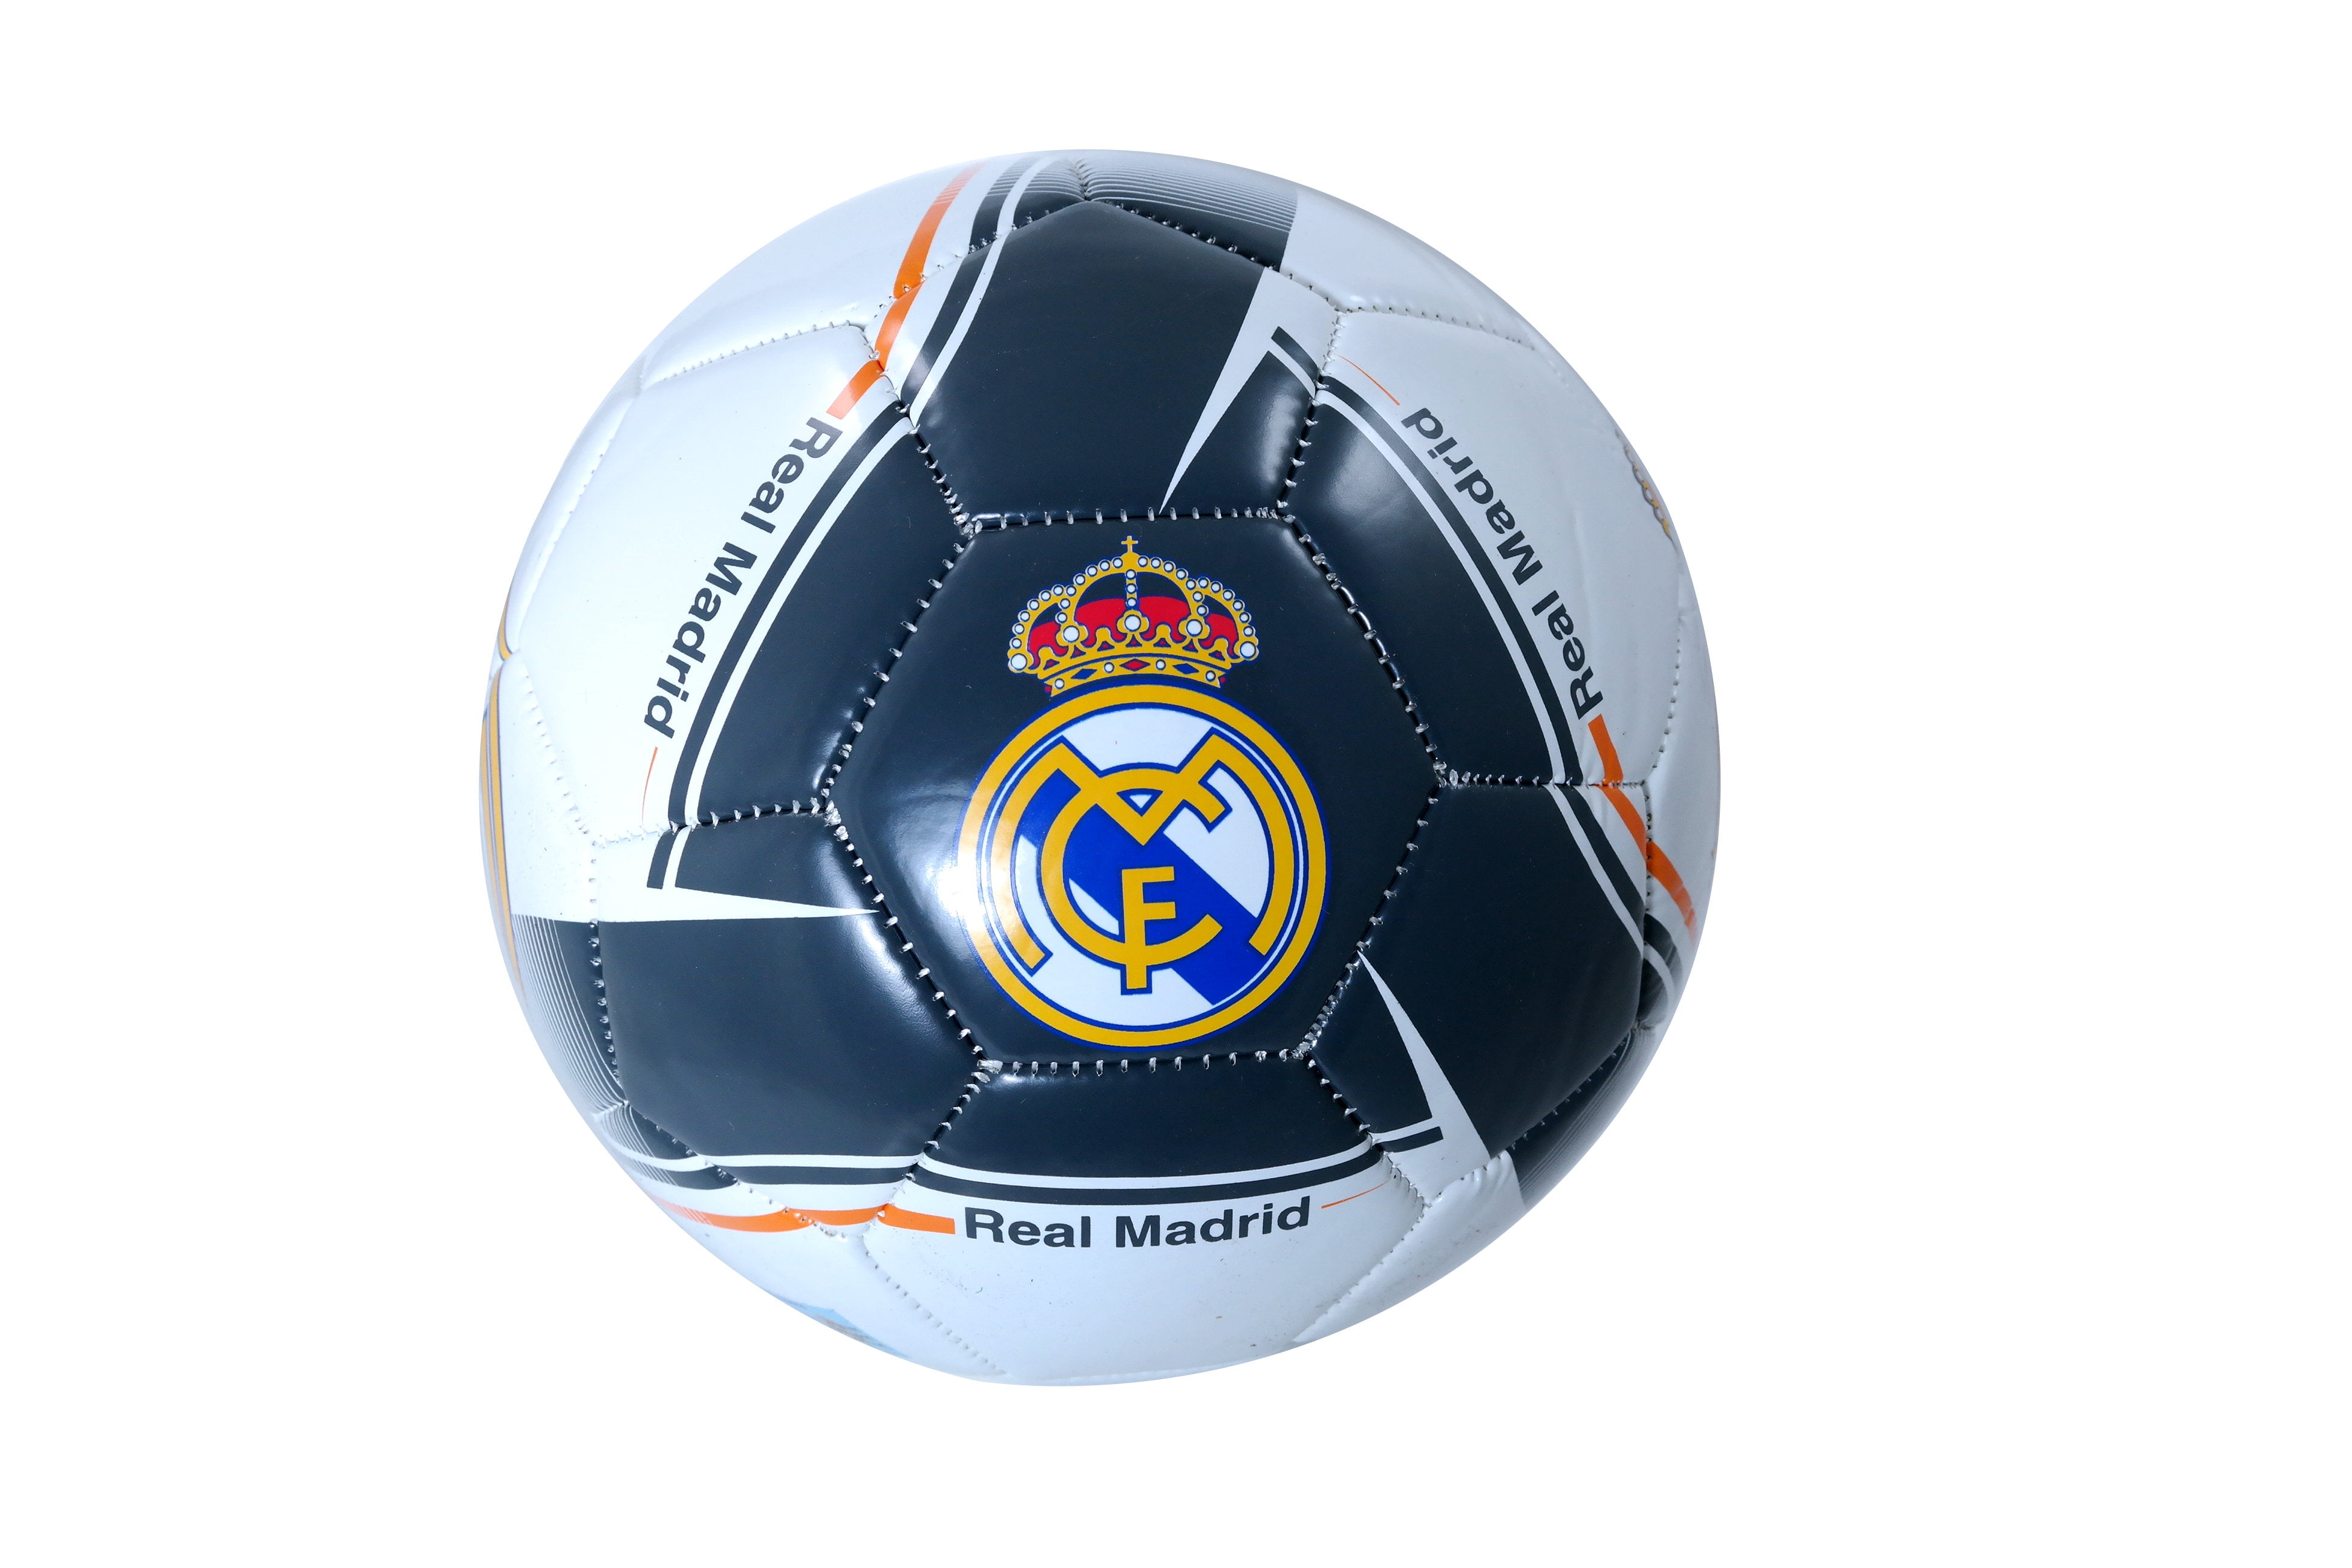 Spedster Real Madrid Football 2018-2019 Top Quality Match ball Size 5 